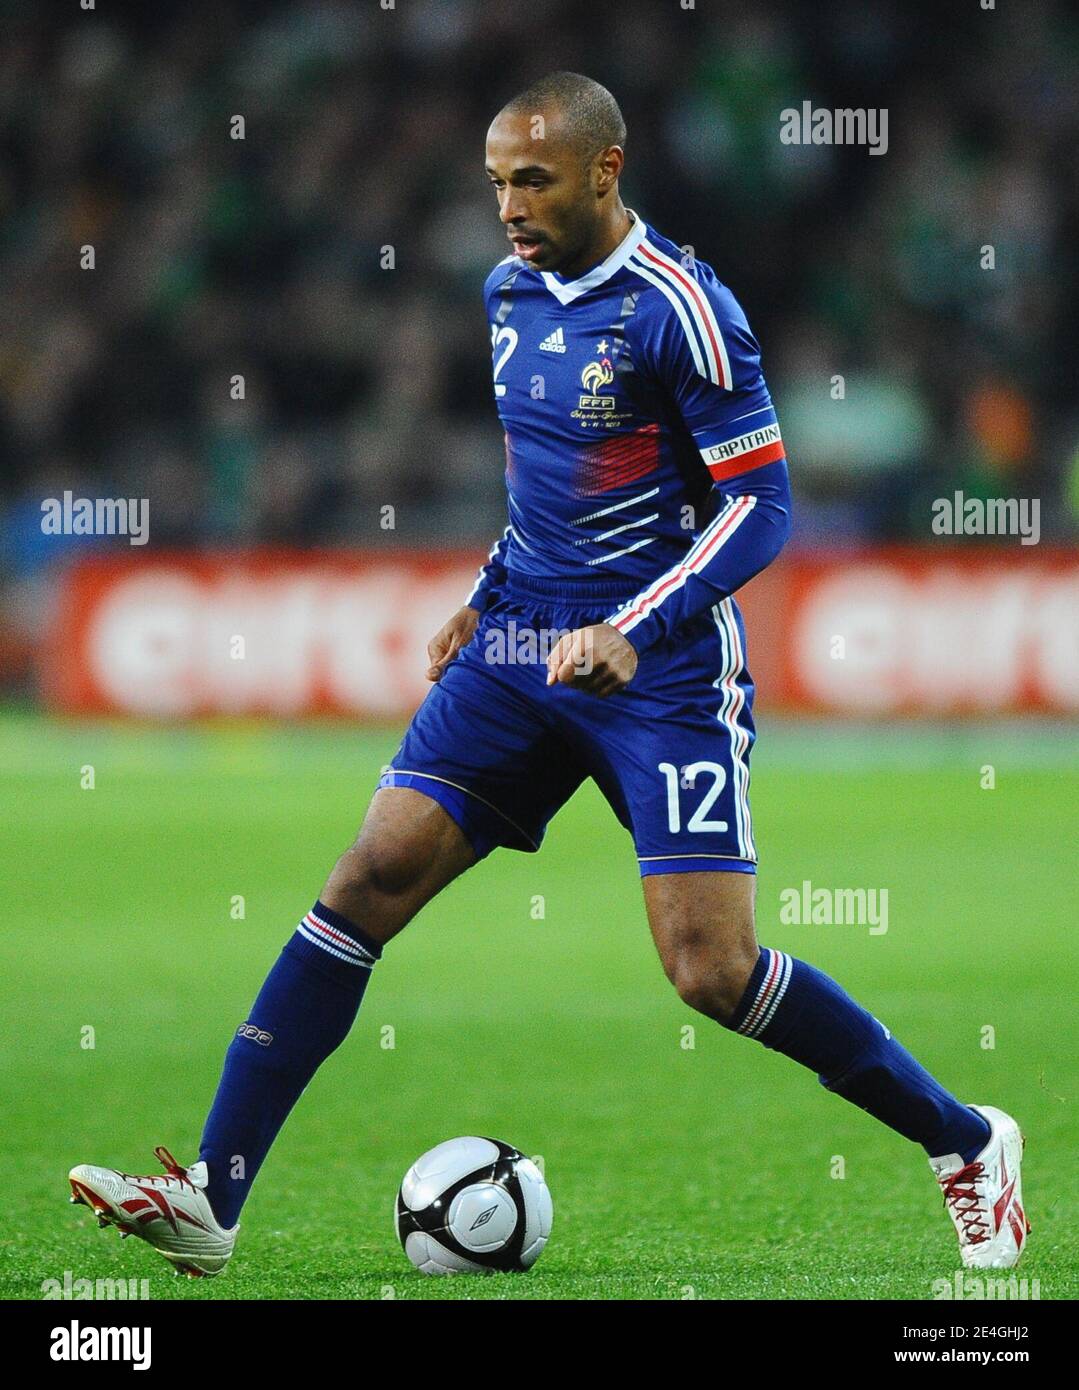 France's Thierry Henry during the World Cup 2010 Qualifying Play off soccer match, Ireland vs France at Croke Park stadium in Dublin, Ireland on November 14, 2009. France won 1-0. Photo by Steeve McMay/ABACAPRESS.COM Stock Photo